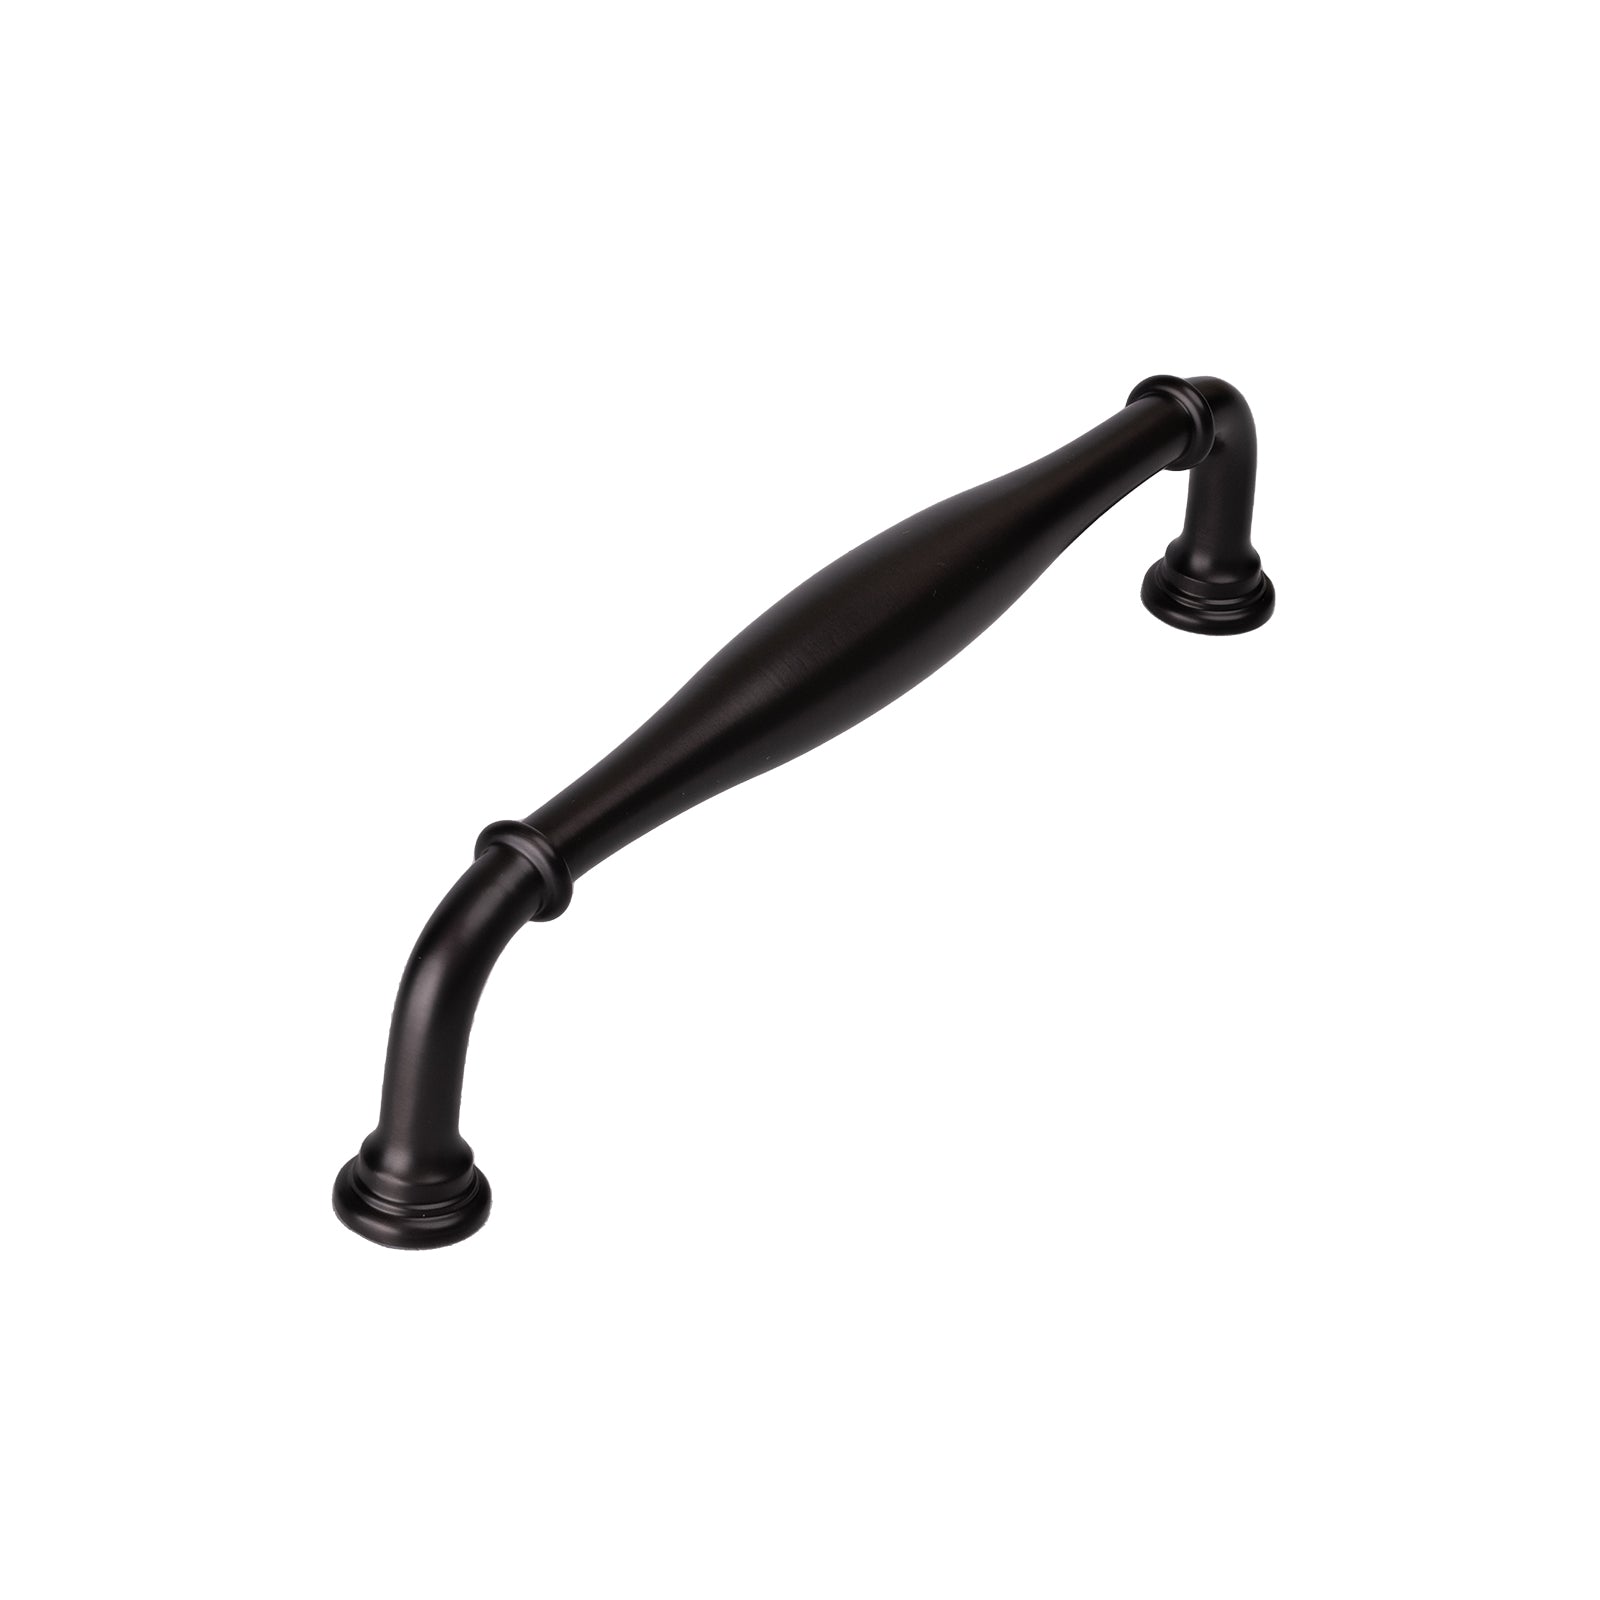 bronze traditional pull handle, rear fix handle, classic pull handle